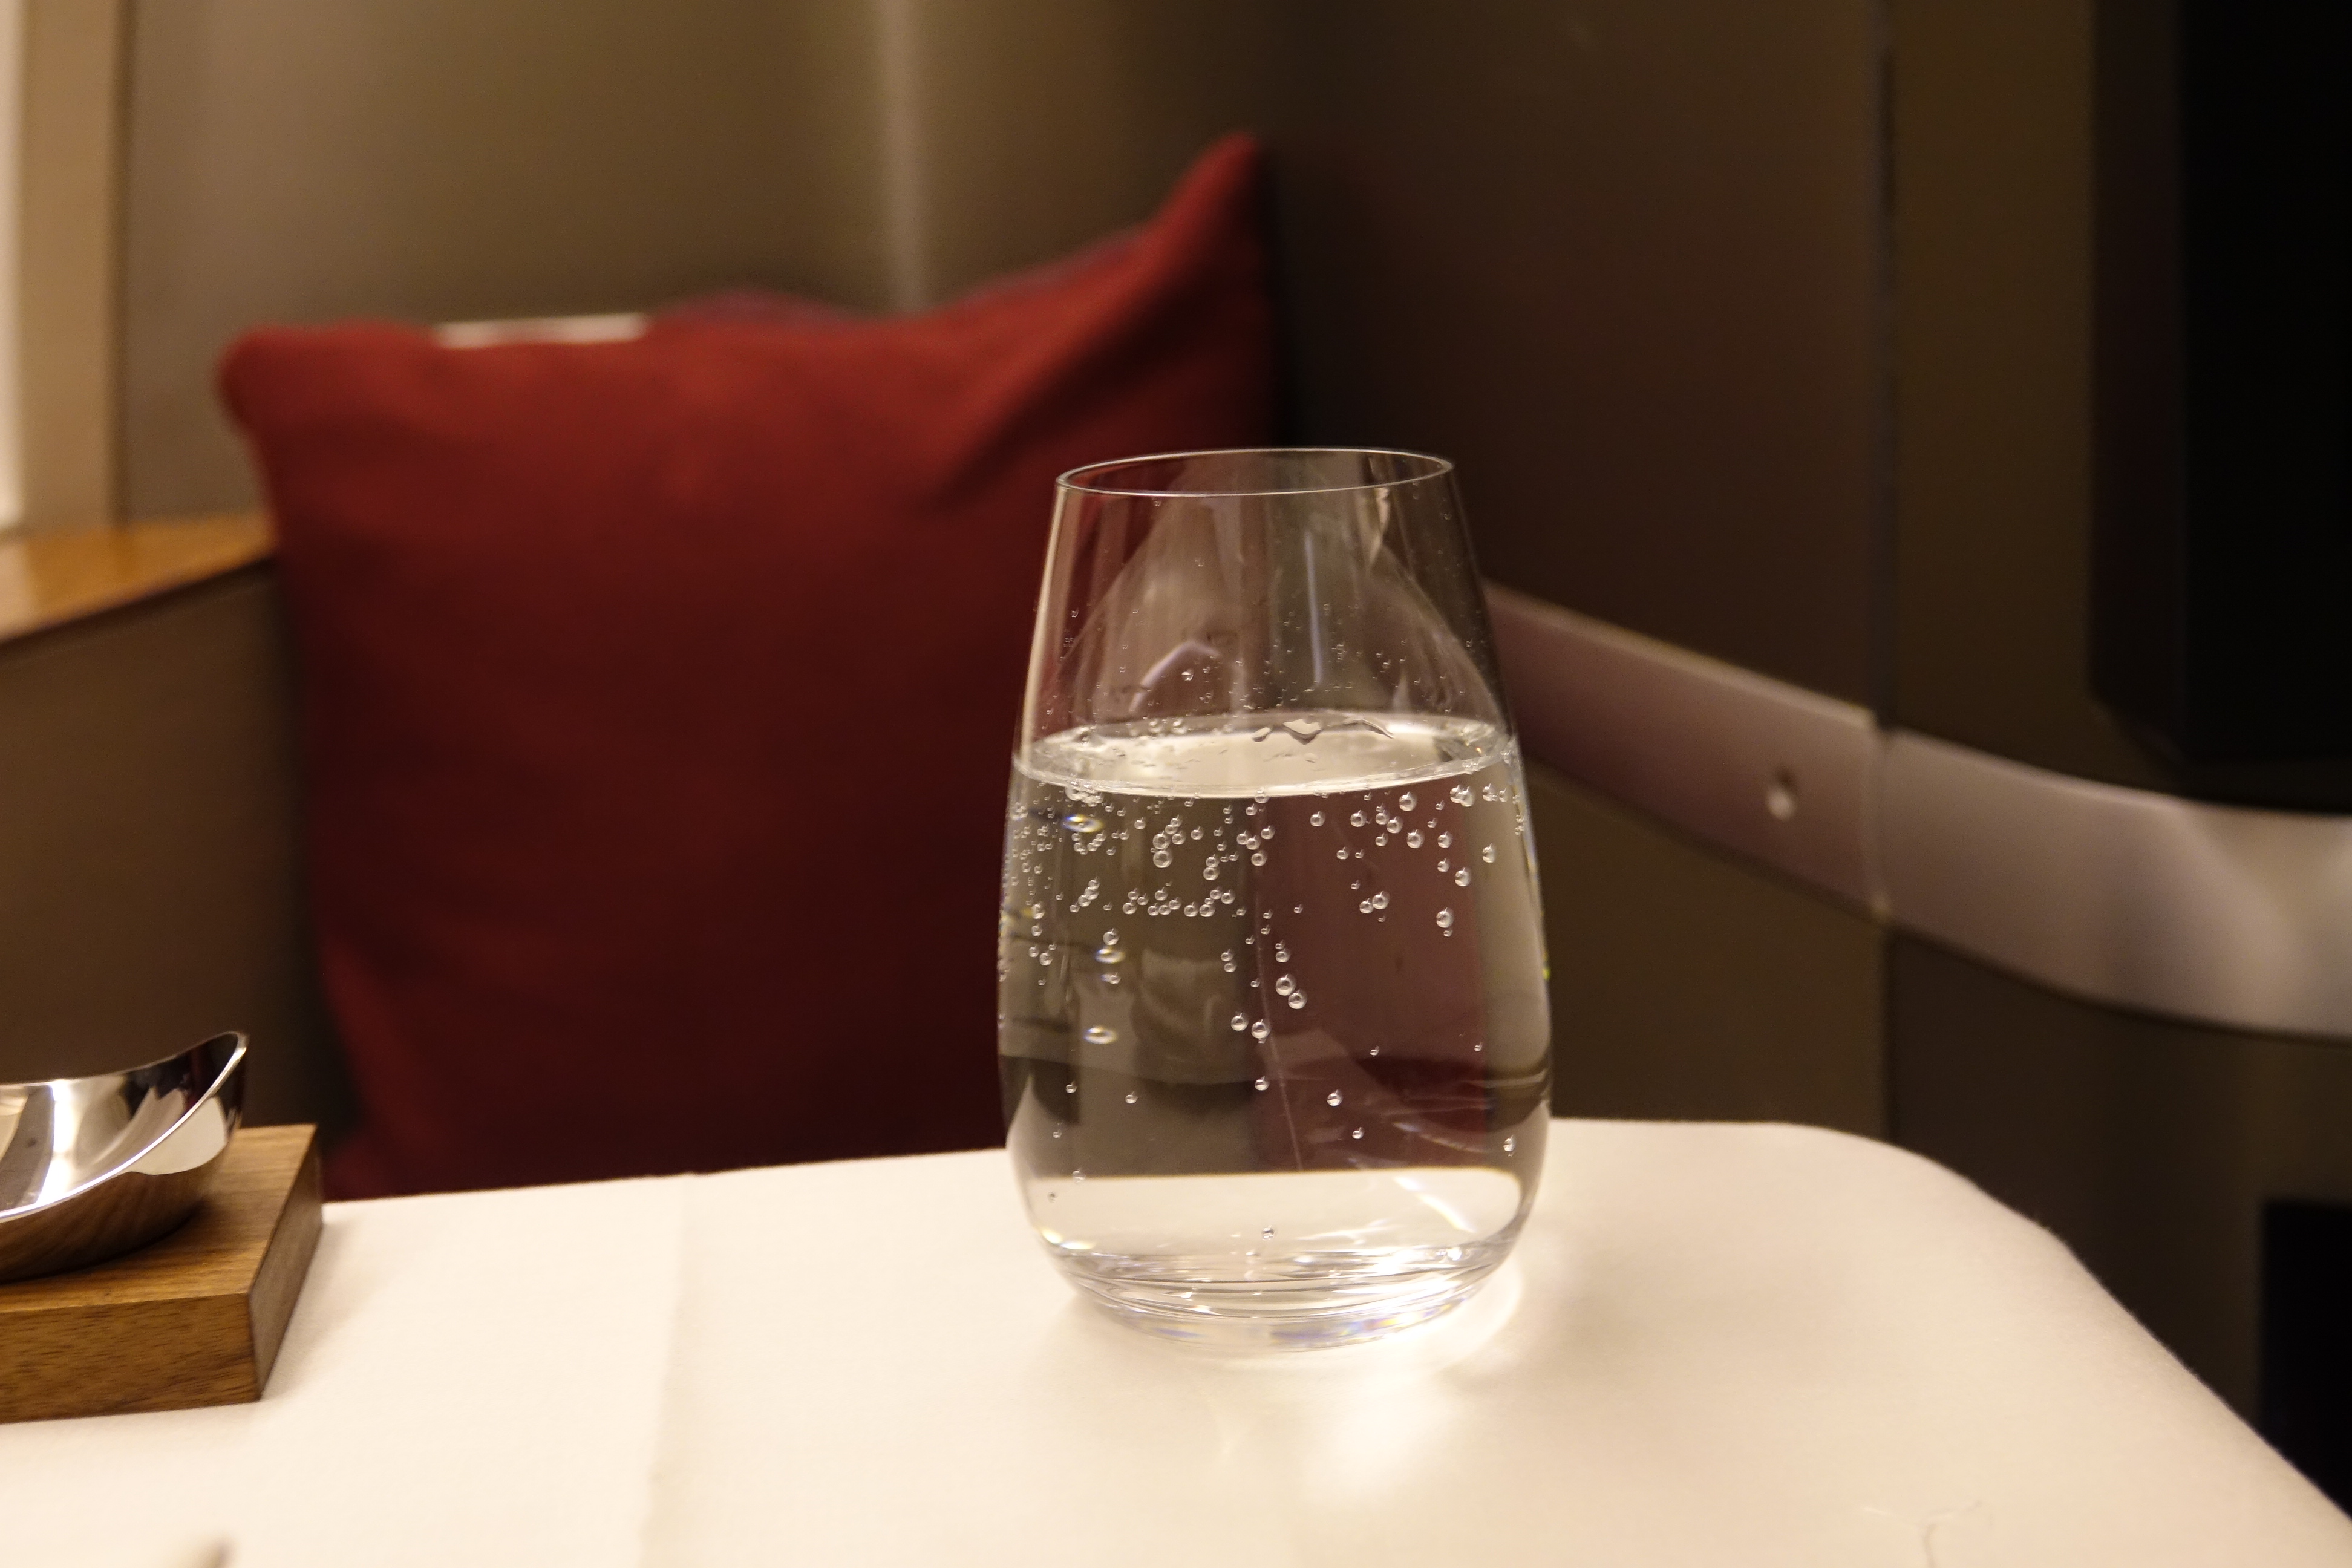 a glass of water on a table